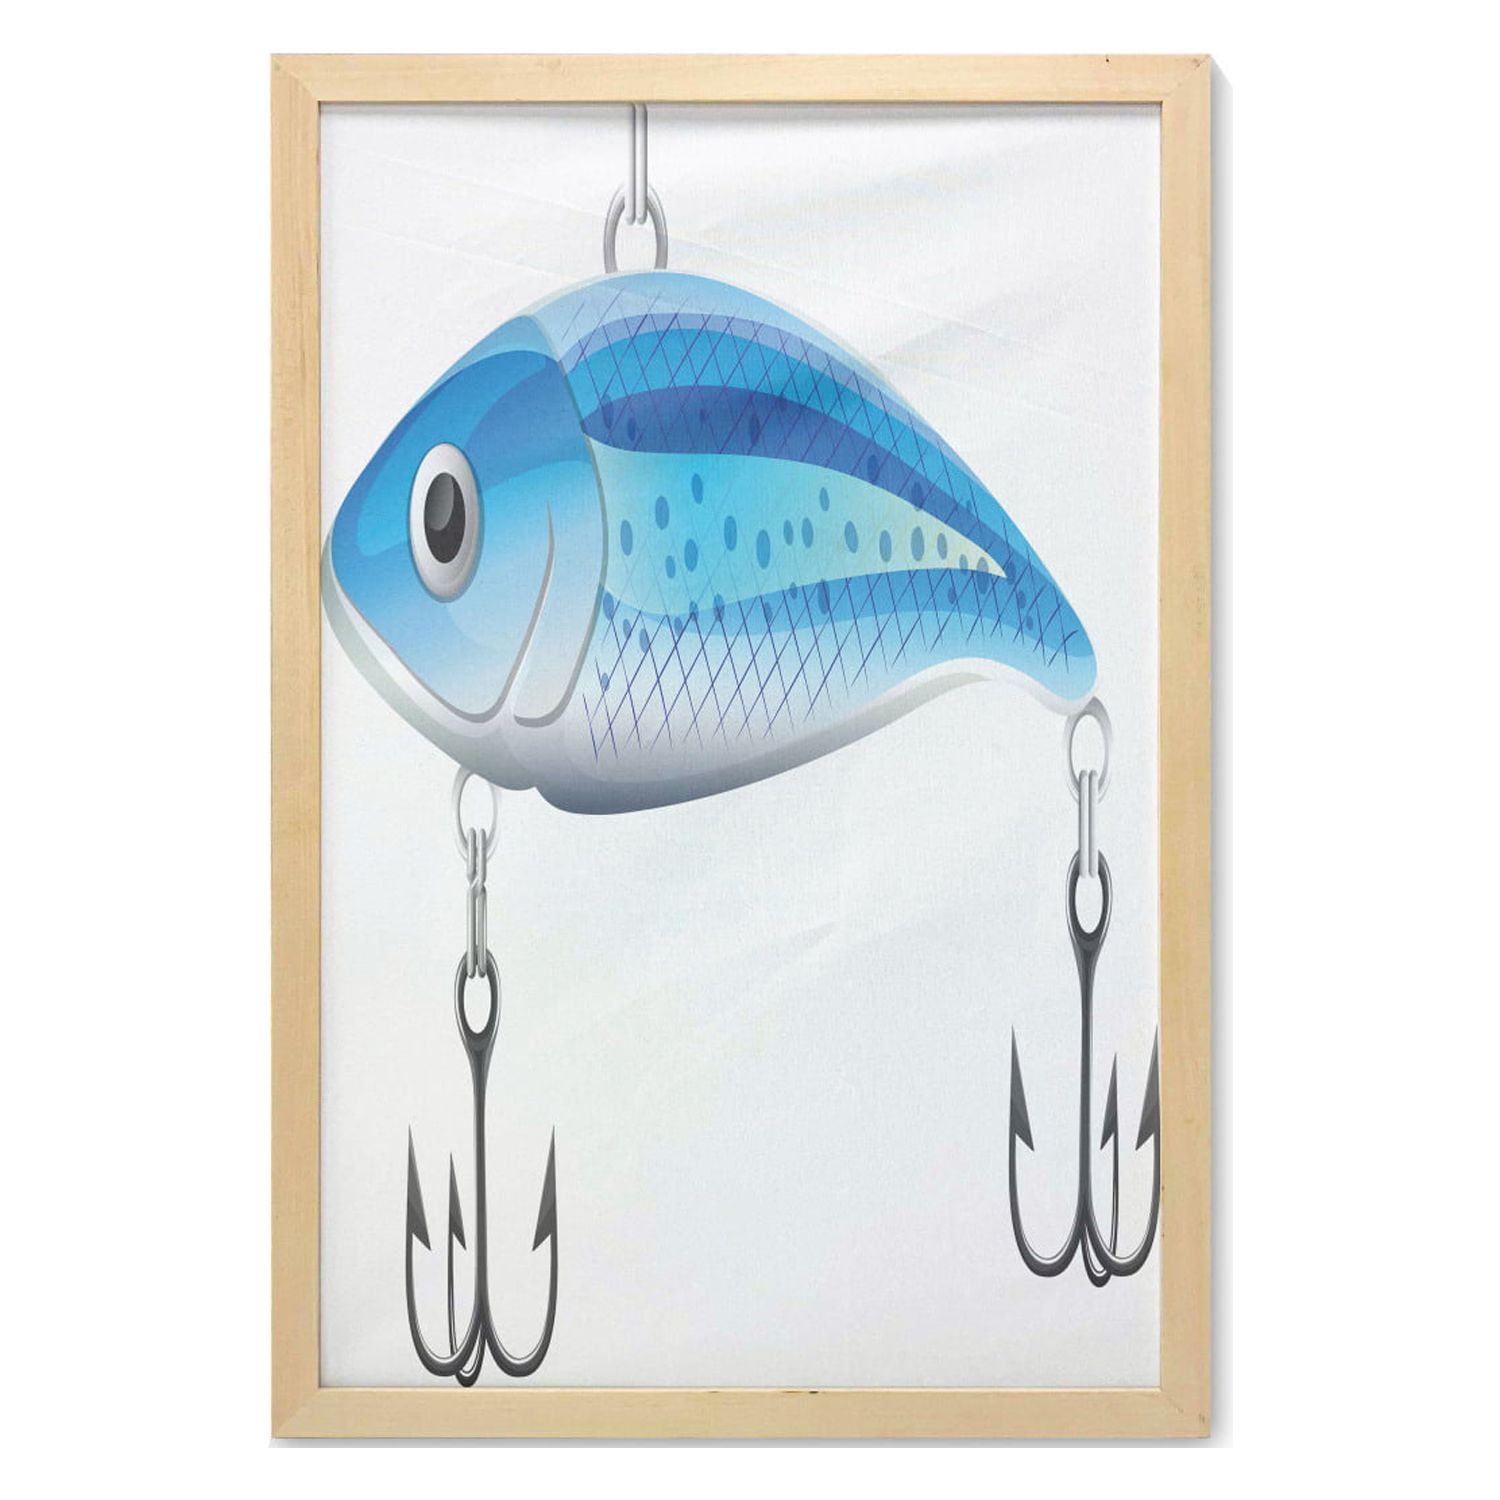 Fishing Theme Wall Art with Frame, Angling Elements with Artificial Fish  Bait with Hooks on Plain Background, Printed Fabric Poster for Bathroom